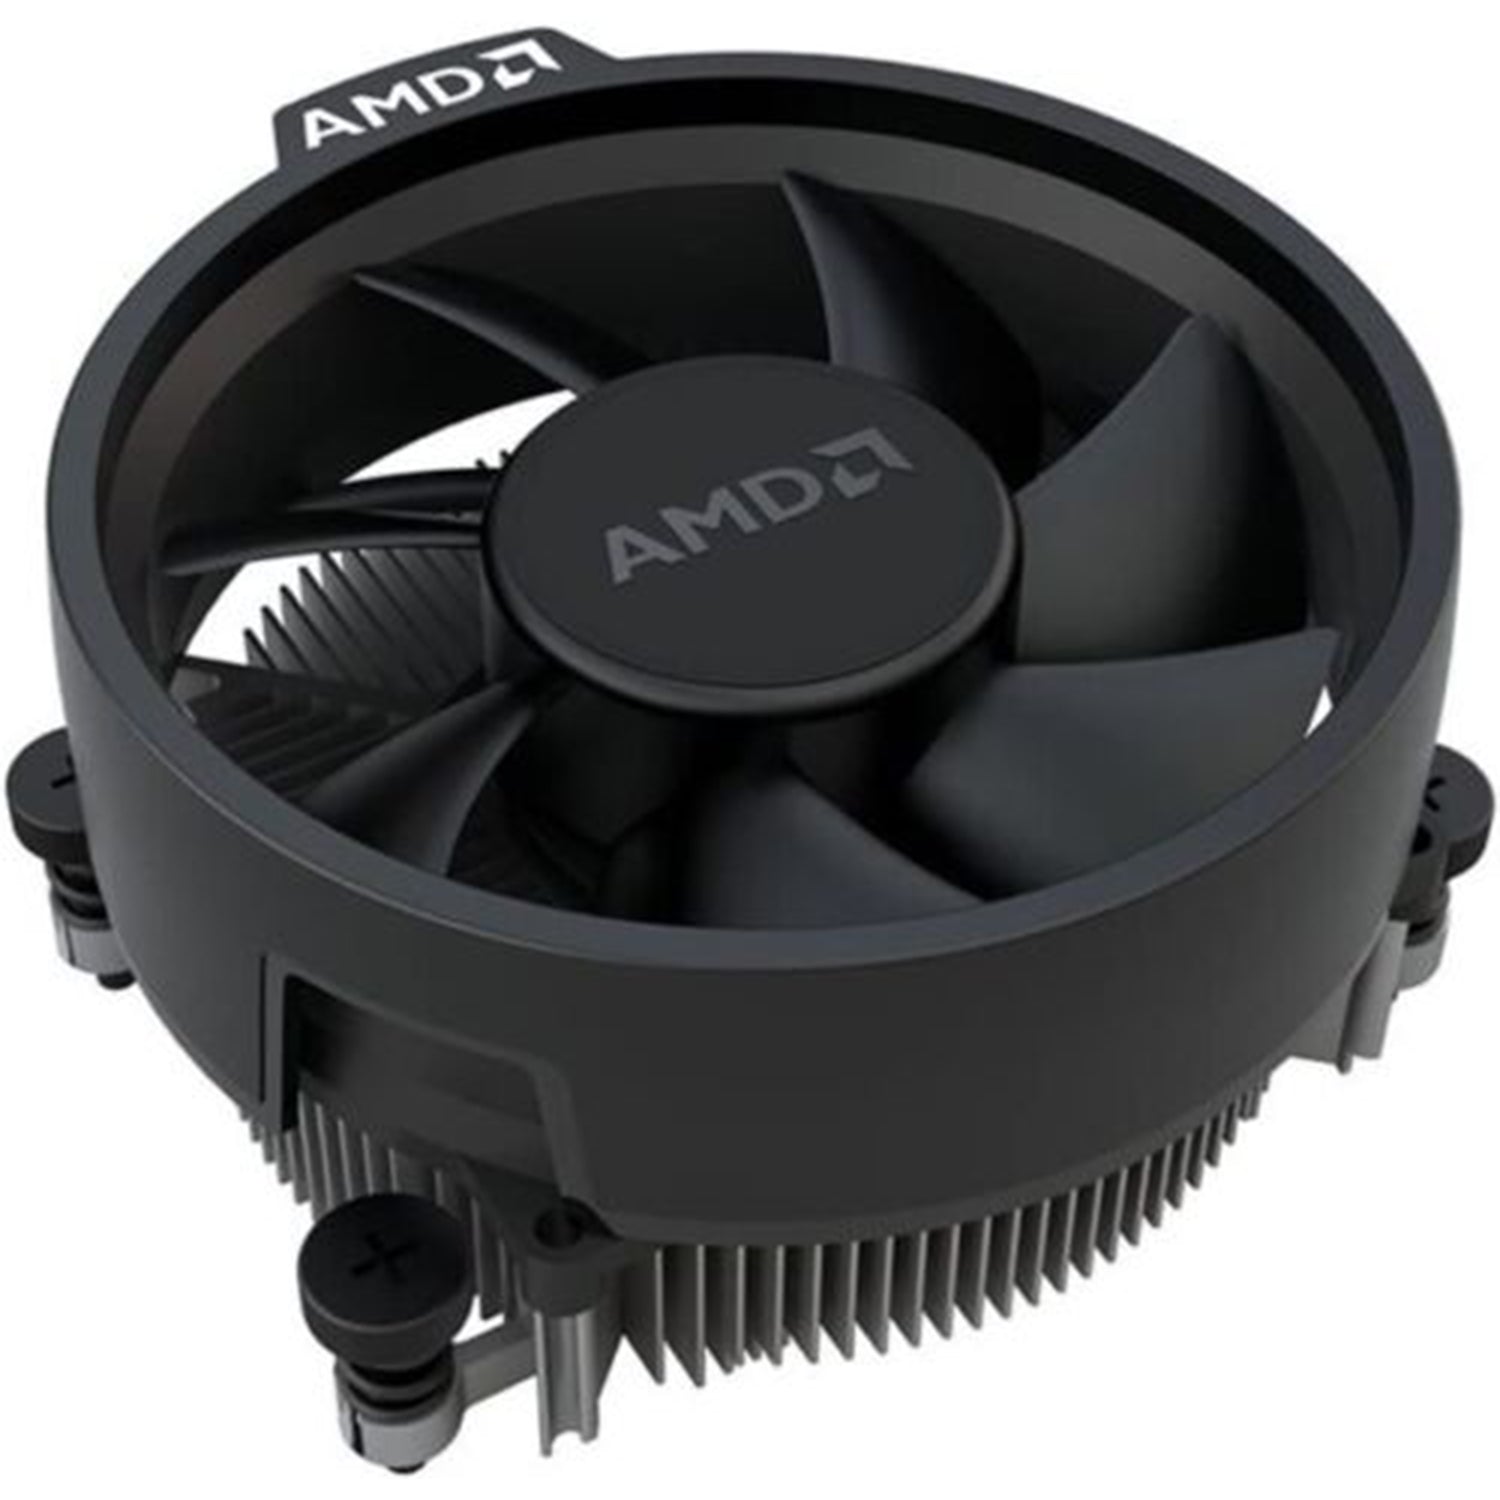 AMD Wraith Stealth CPU Cooler for Ryzen Processors, Socket AM4 4-Pin Connector CPU Cooler with Aluminum Heatsink | AMD Processor cooling Fan